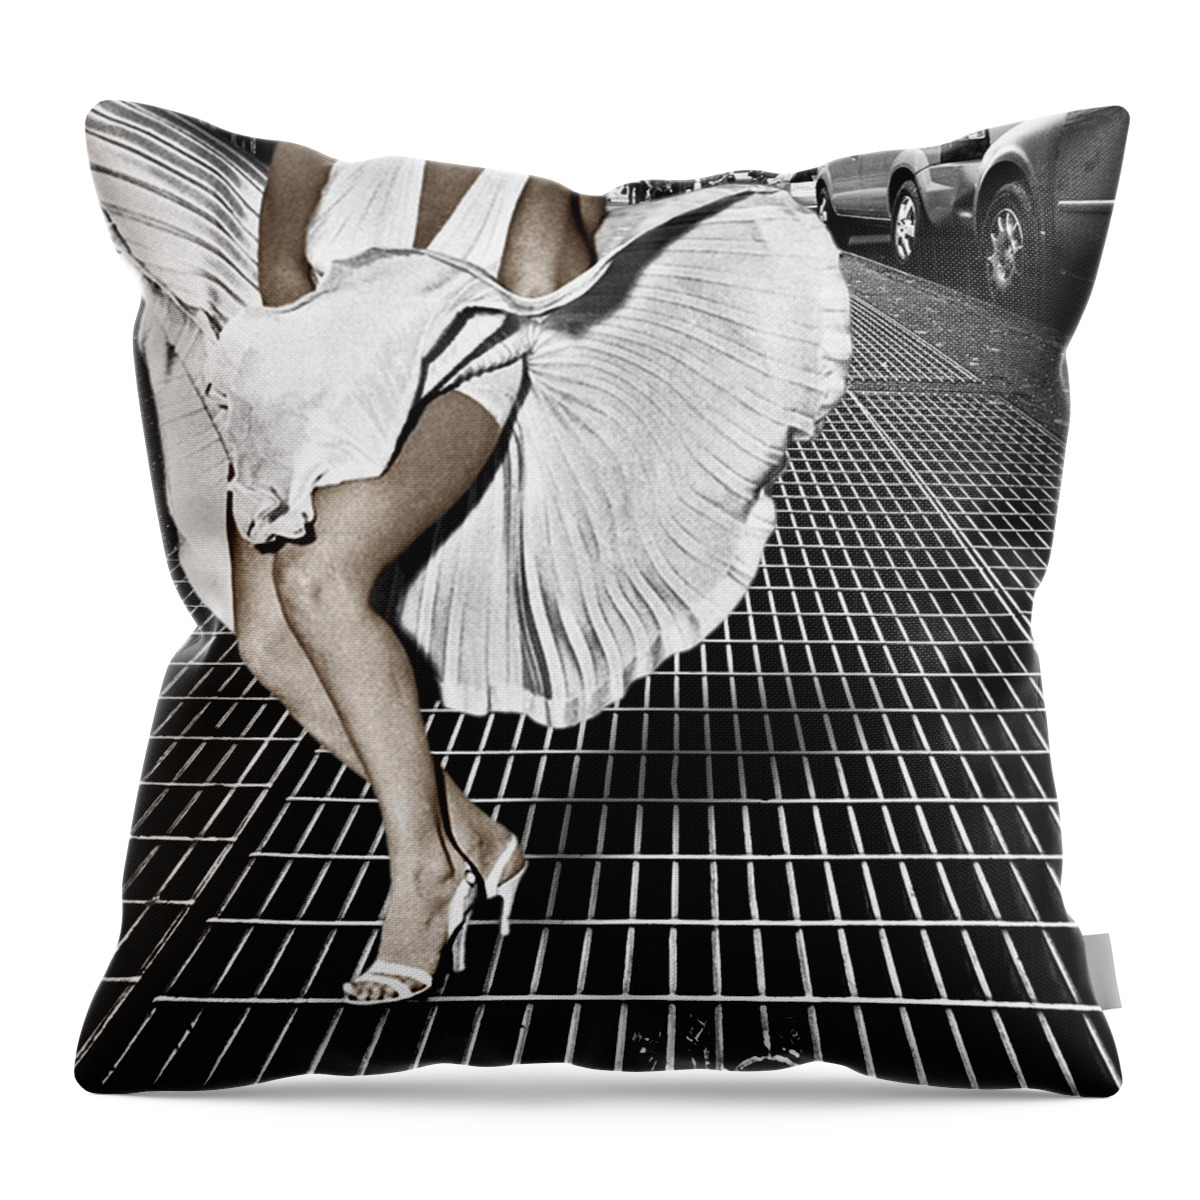 Marilyn Monroe Throw Pillow featuring the photograph Marilyn Monroe In New York City by Tony Rubino